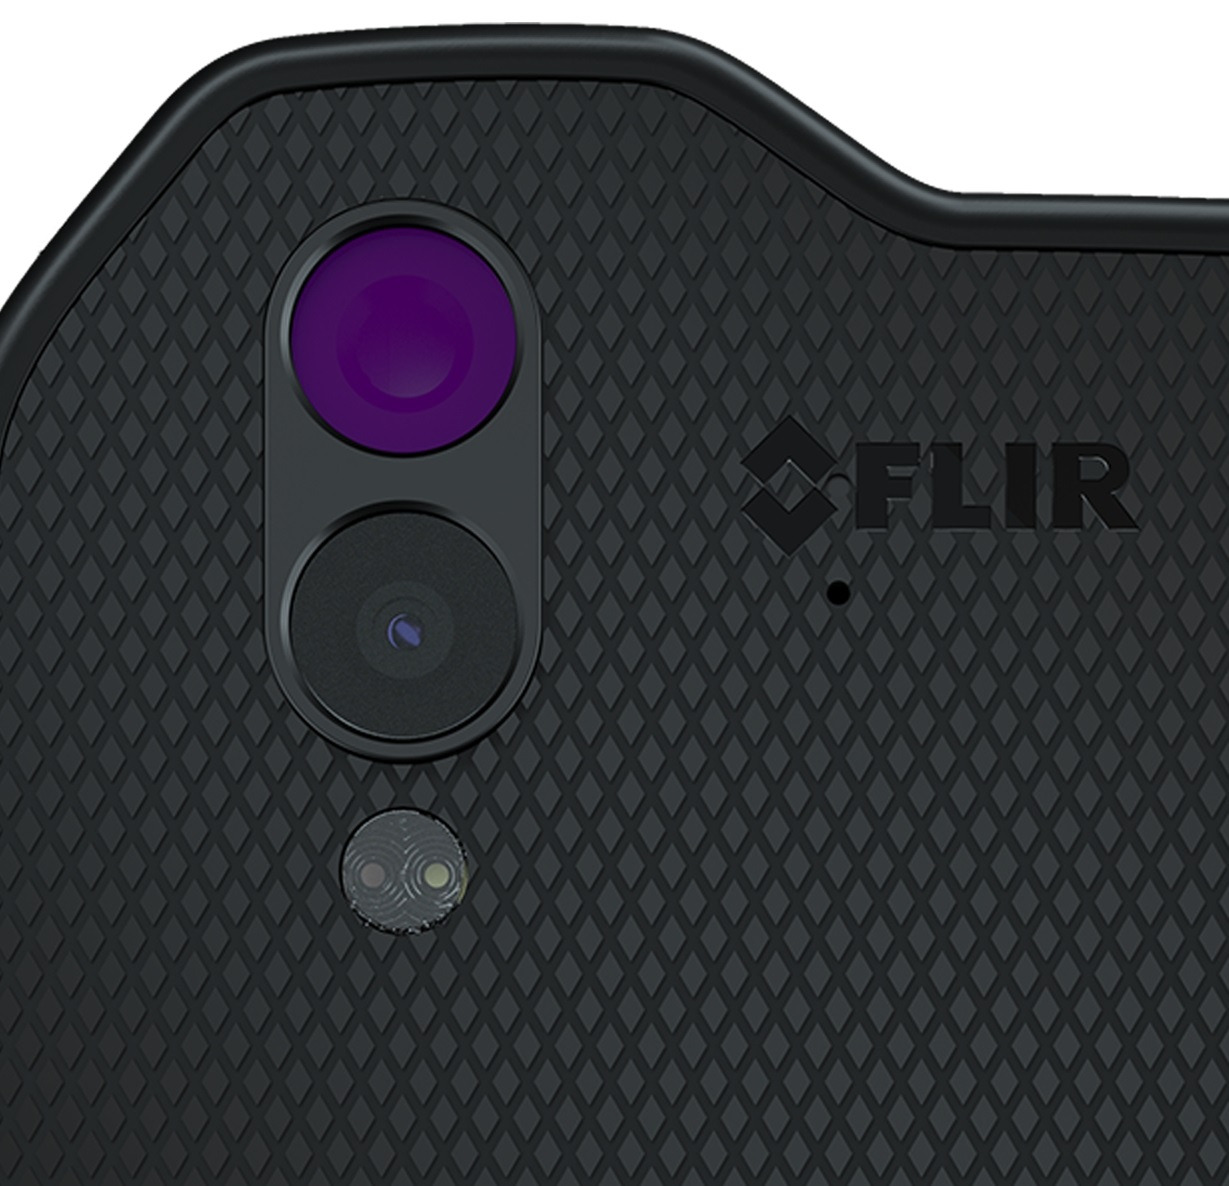 New Cat S61 Android smartphone with Thermal by FLIR